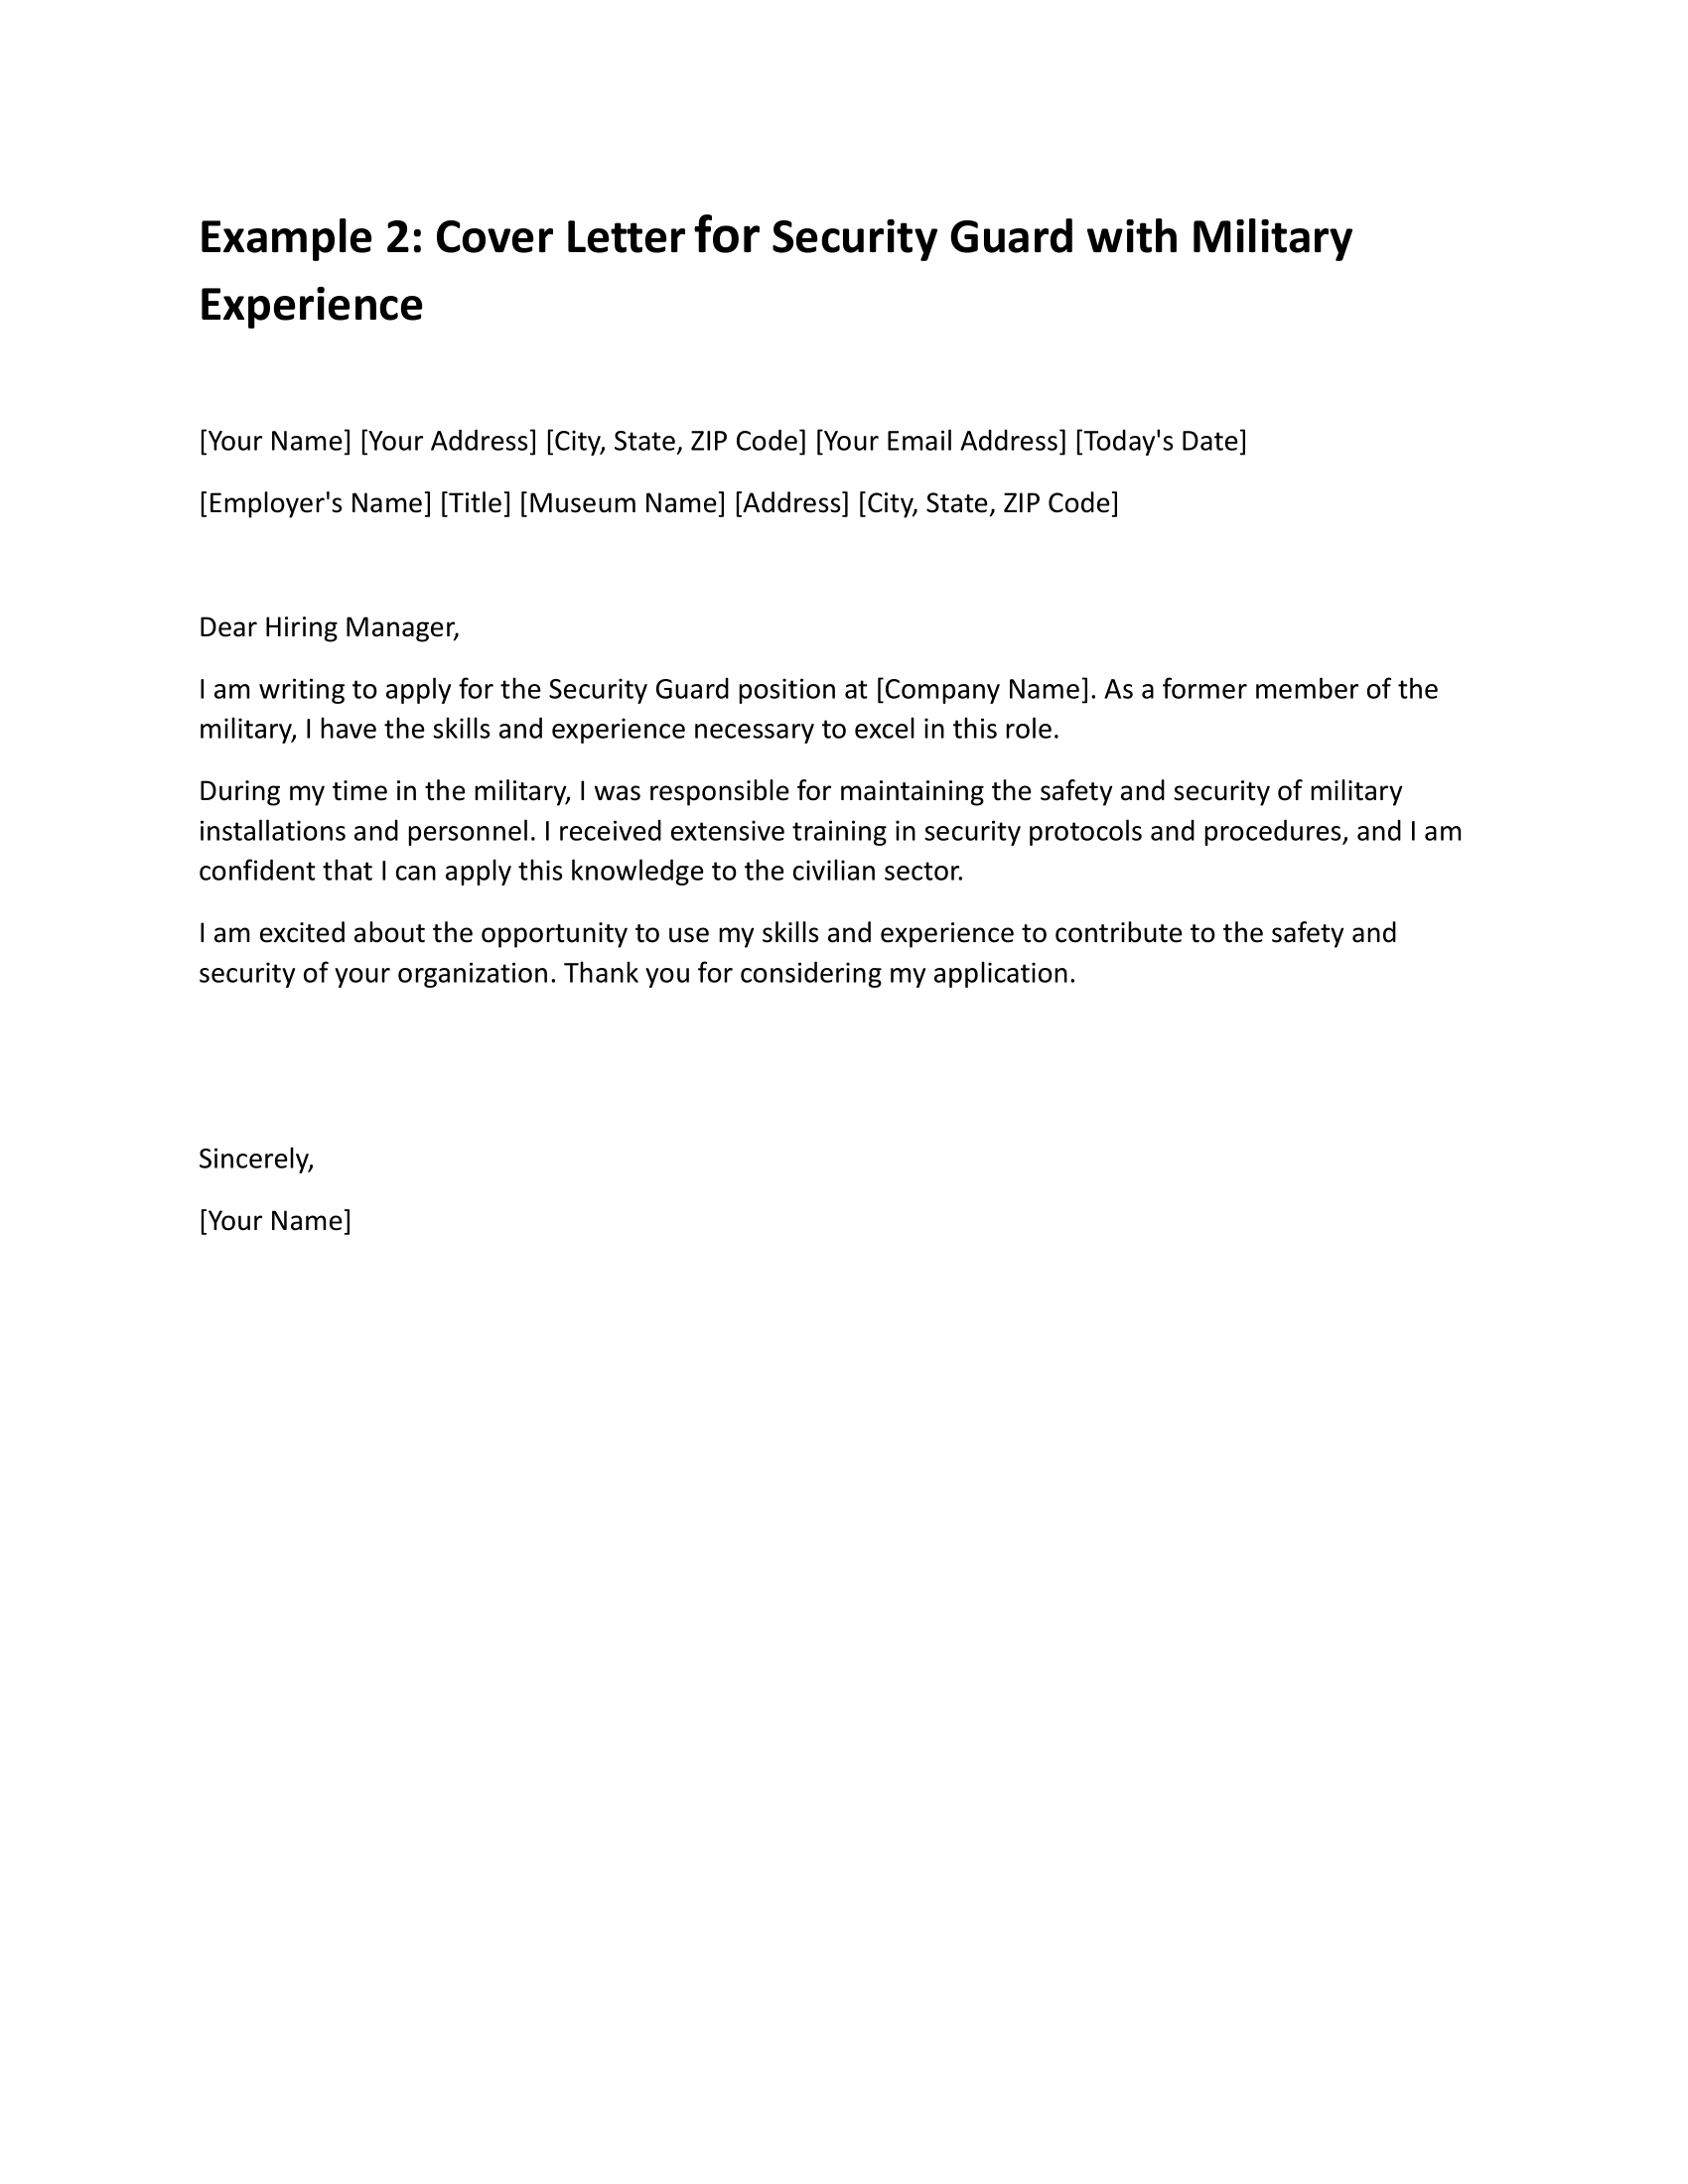 Cover Letter for Security Guard with Military Experience